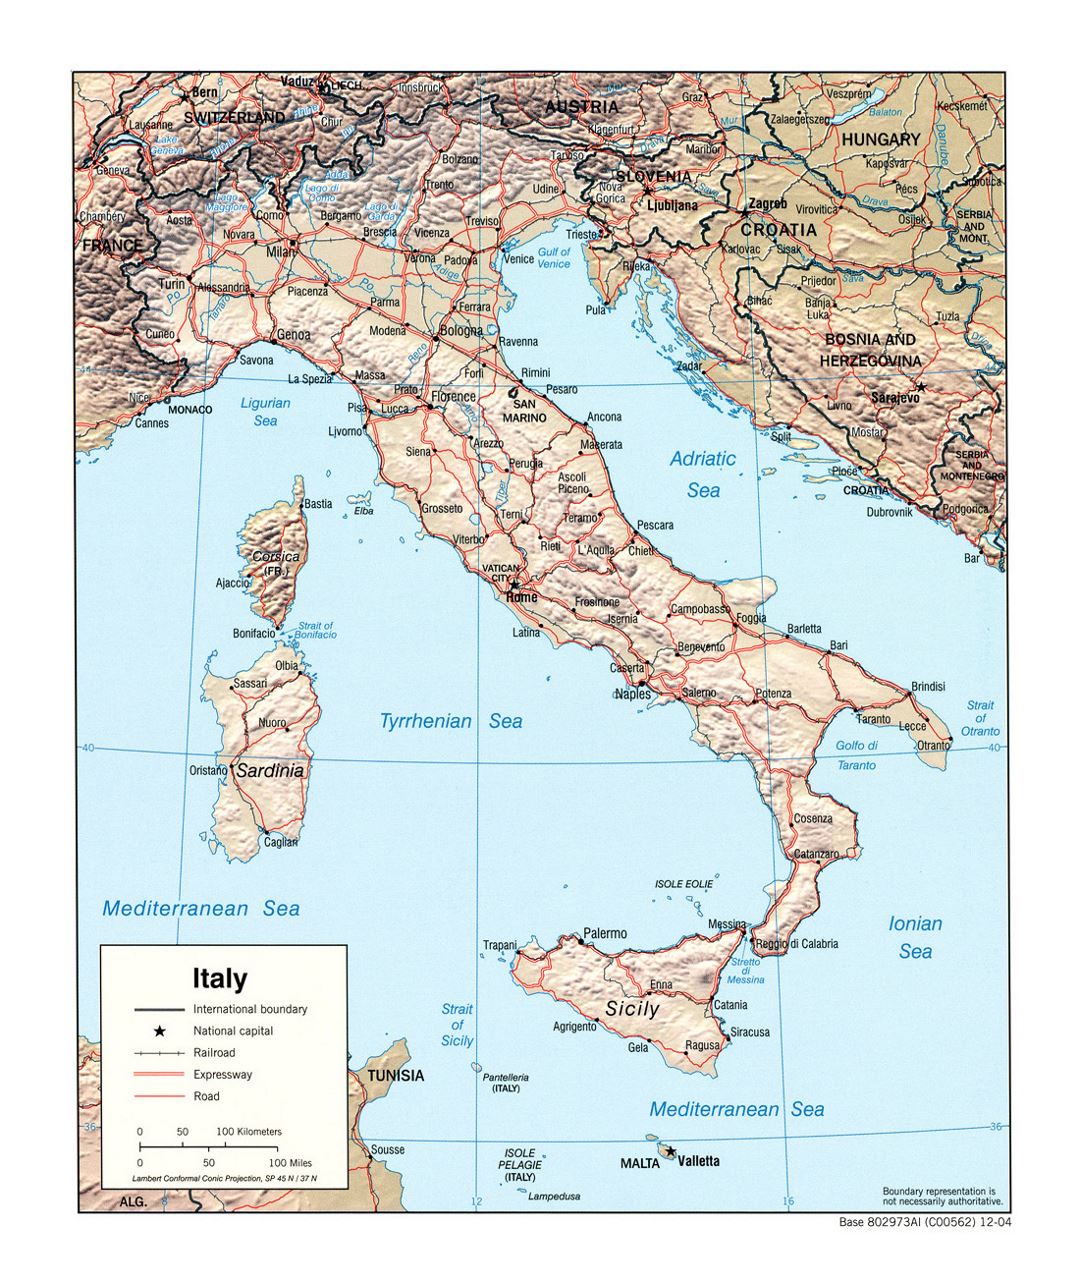 Large political map of Italy with relief, roads, railroads and major cities - 2004